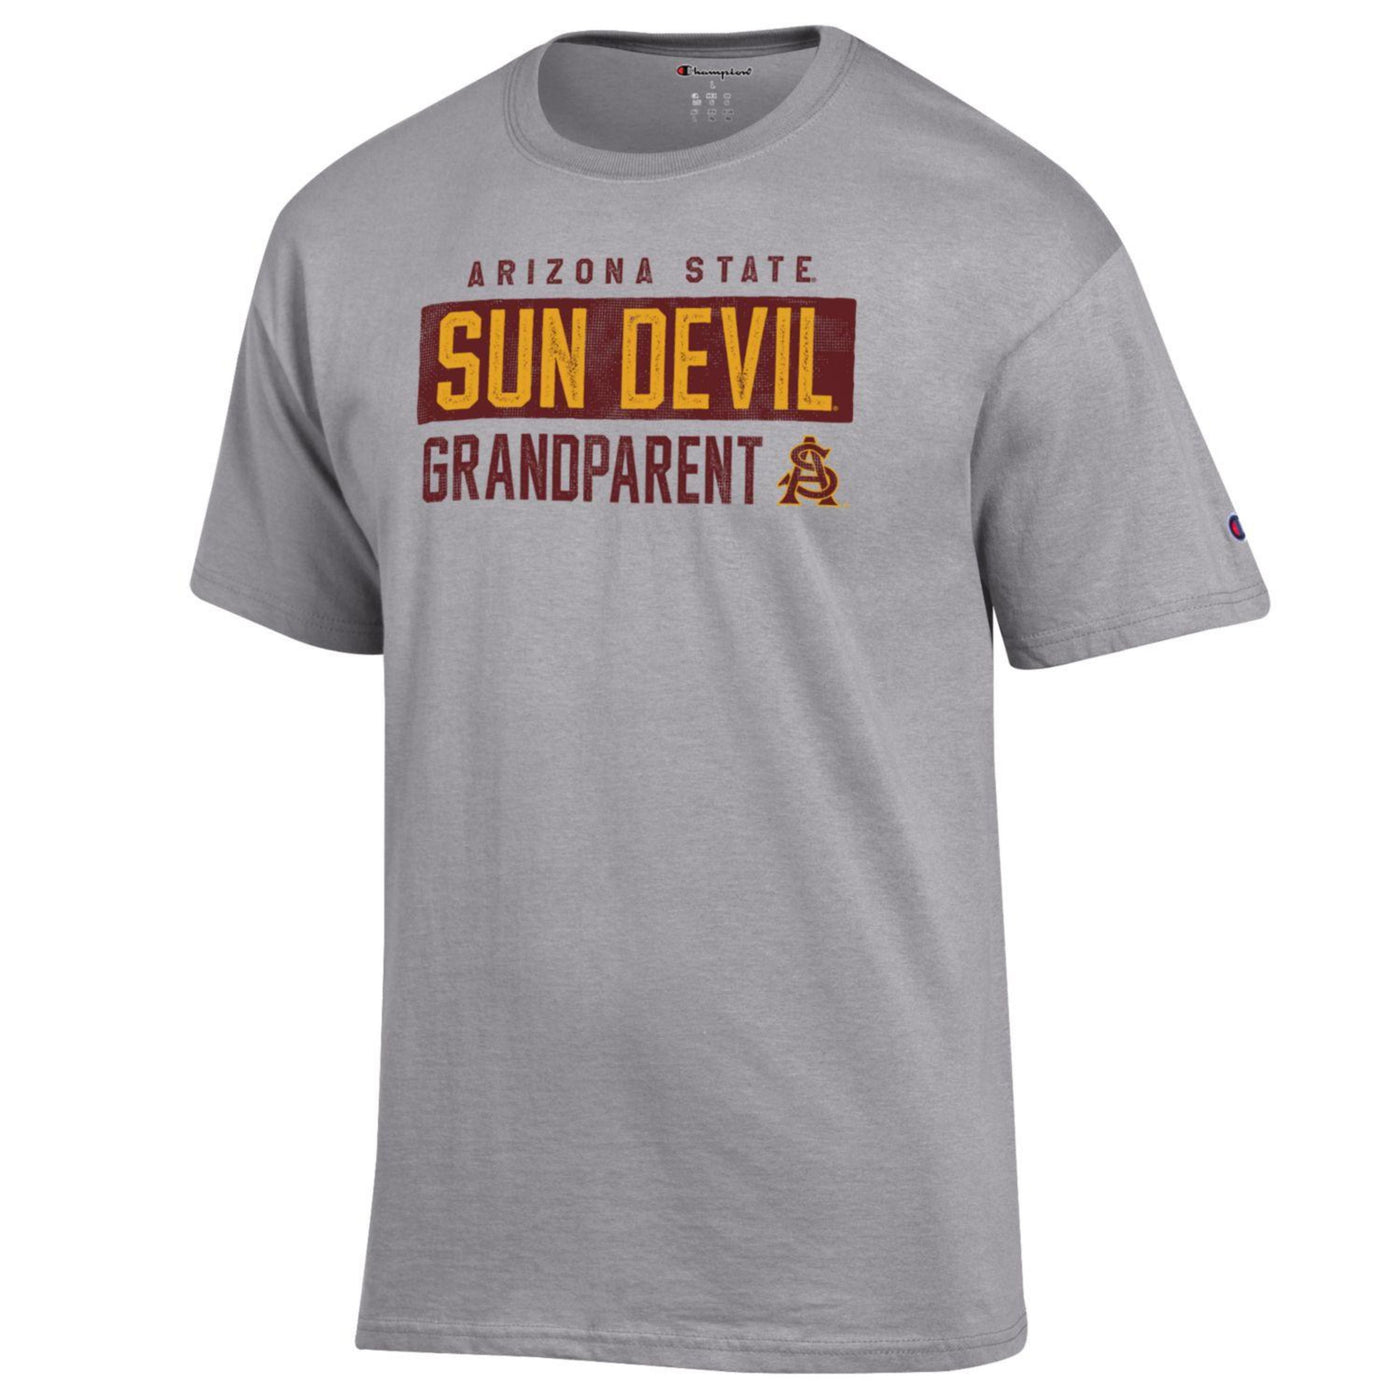 ASU gray Champion tee with 'Arizona State, Sun Devil, Grandparent' lettering next to an interlocking 'A' and 'S'